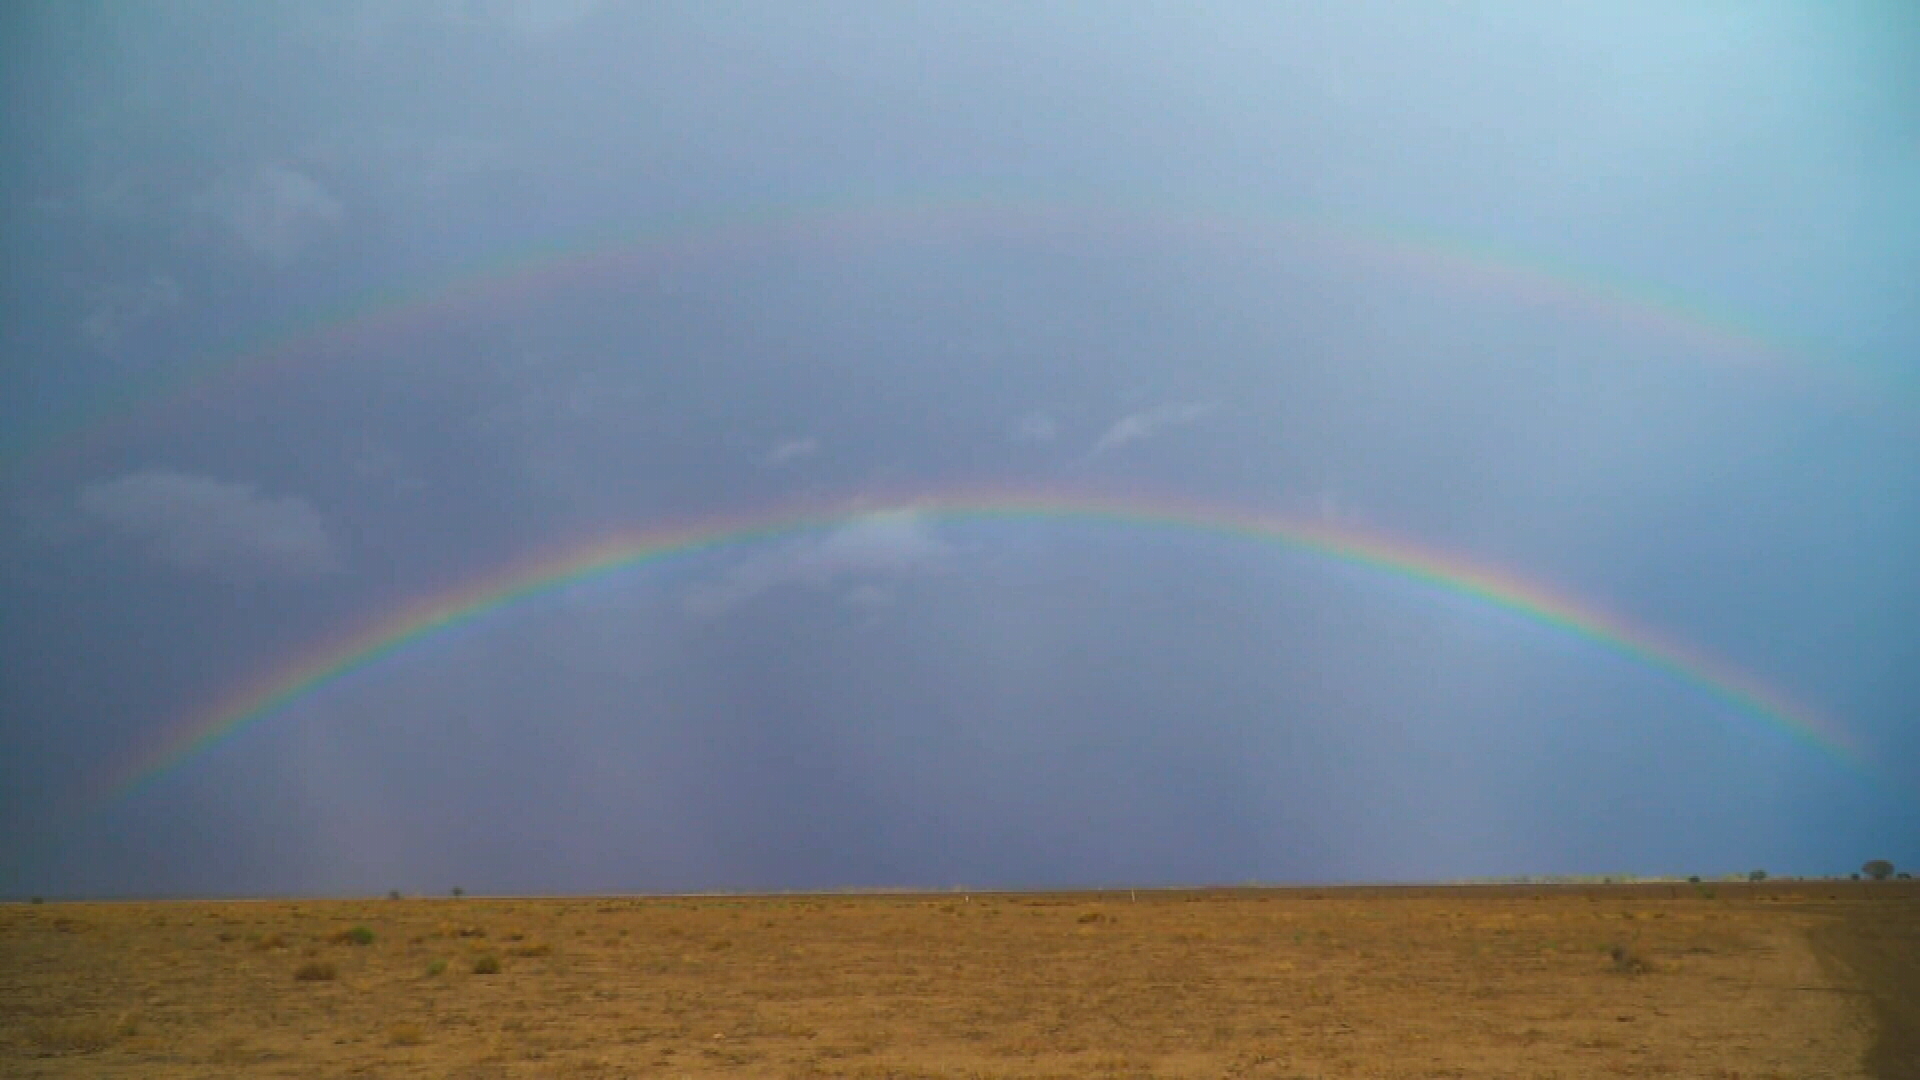 A rainbow over Coonamble, NSW.